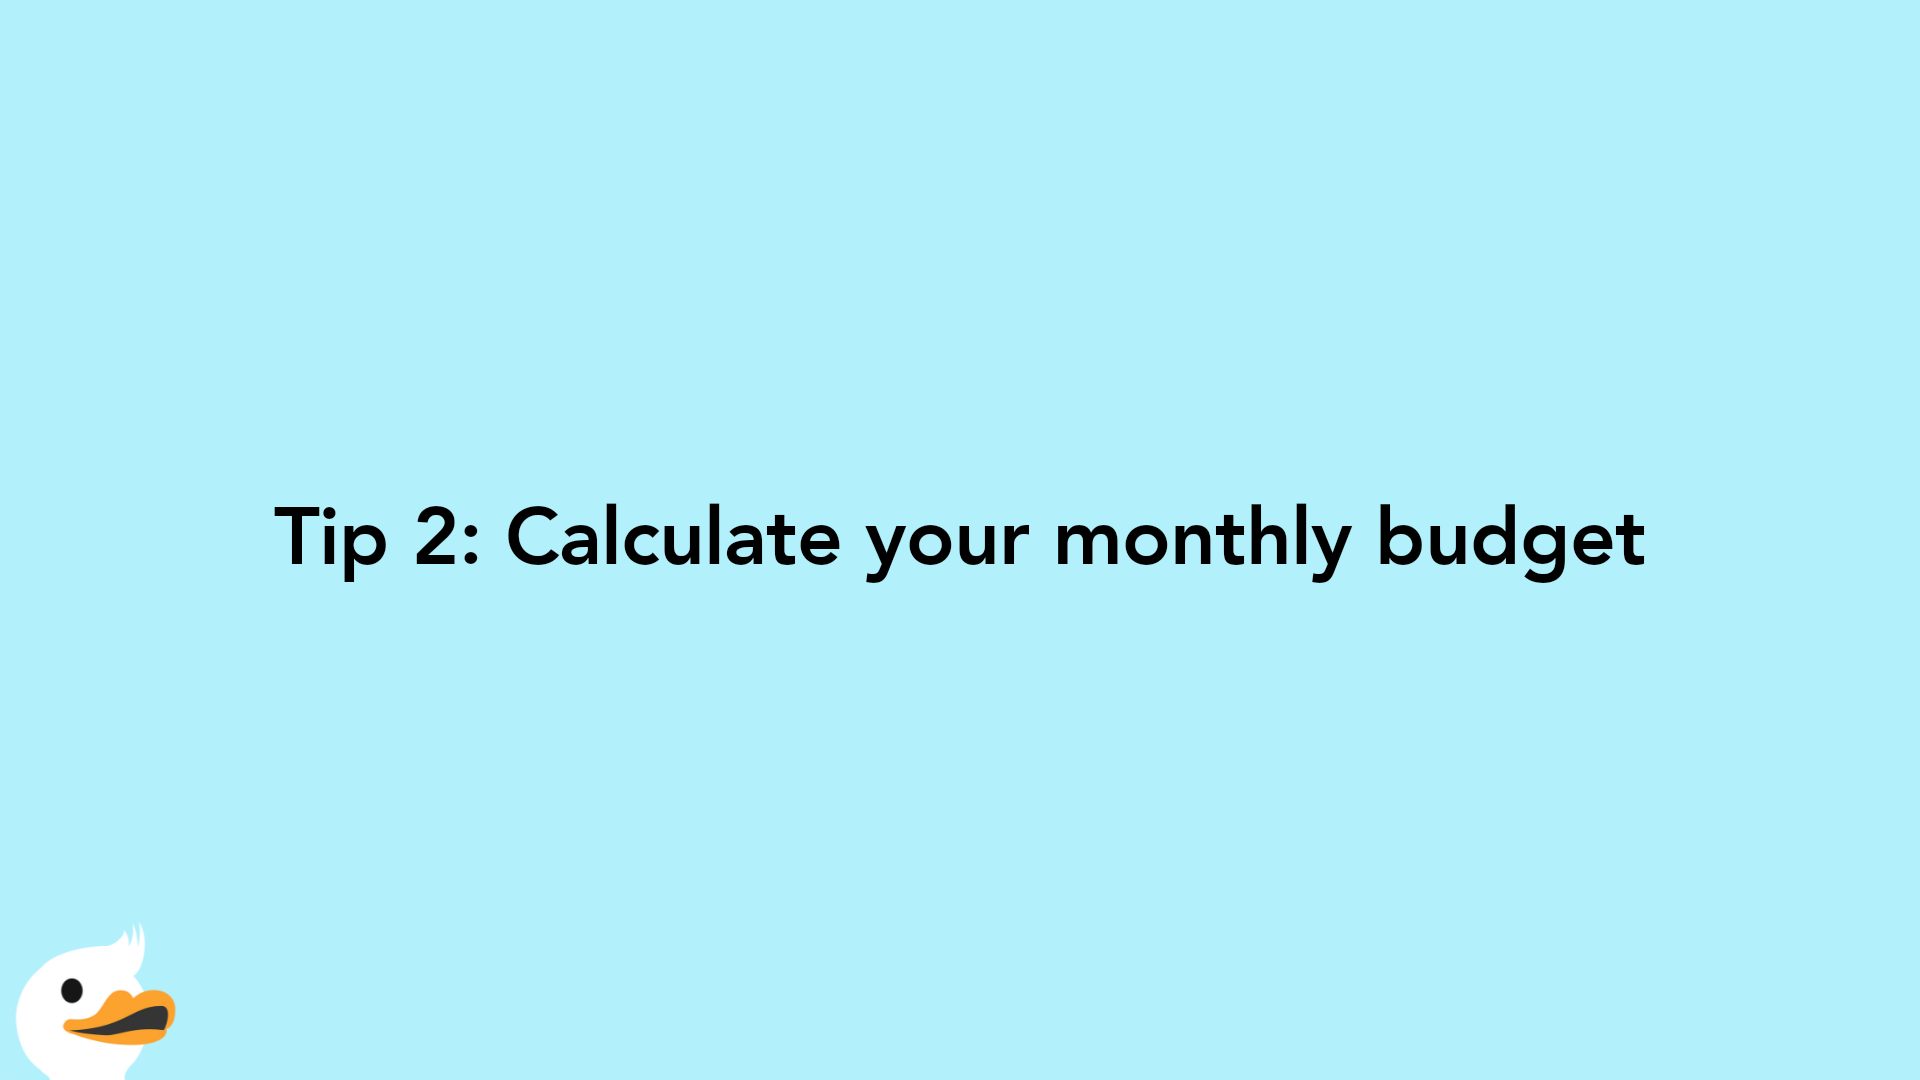 Tip 2: Calculate your monthly budget